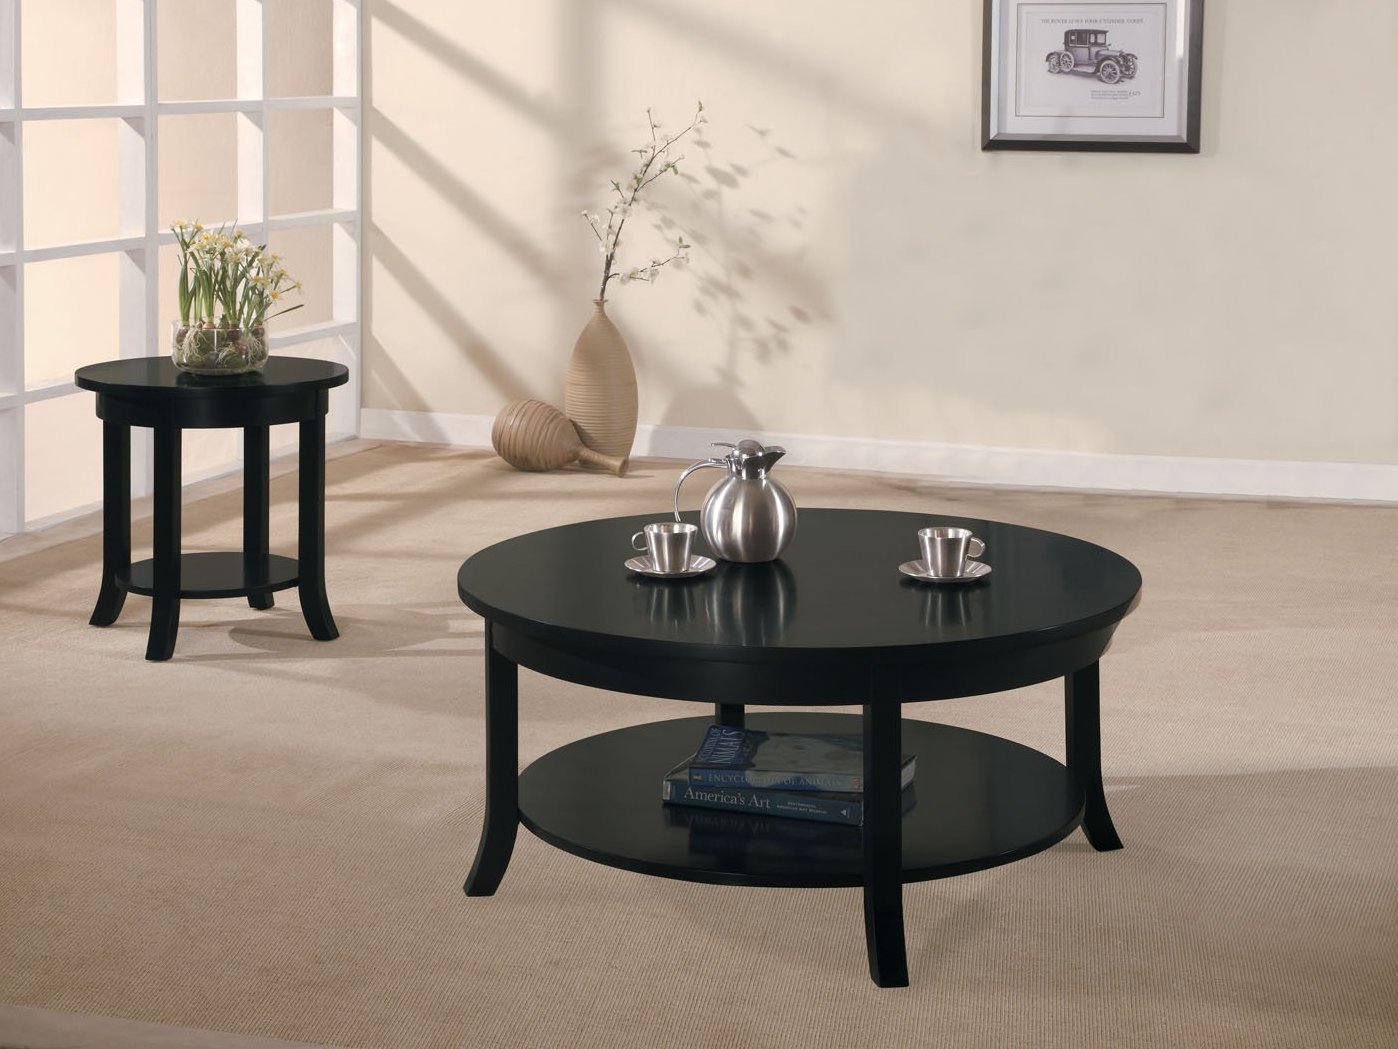 Black Coffee Table Design Images Photos Pictures